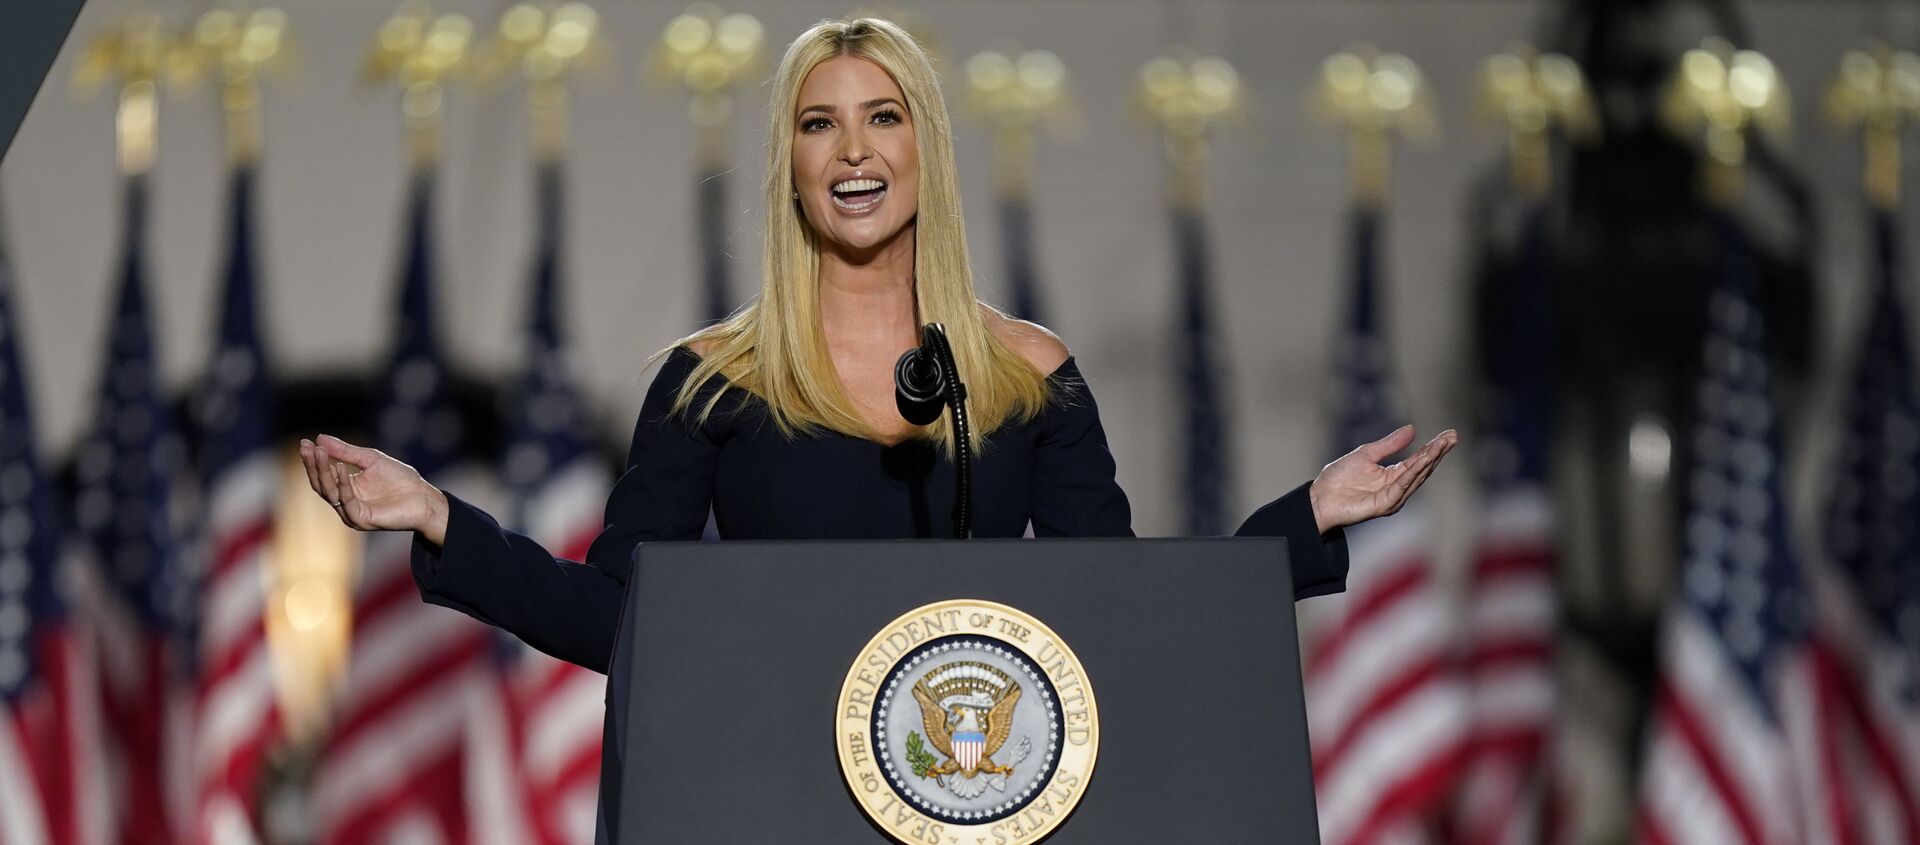 vanka Trump speaks to introduce President Donald Trump from the South Lawn of the White House on the fourth day of the Republican National Convention, Thursday, Aug. 27, 2020 - Sputnik International, 1920, 06.02.2021